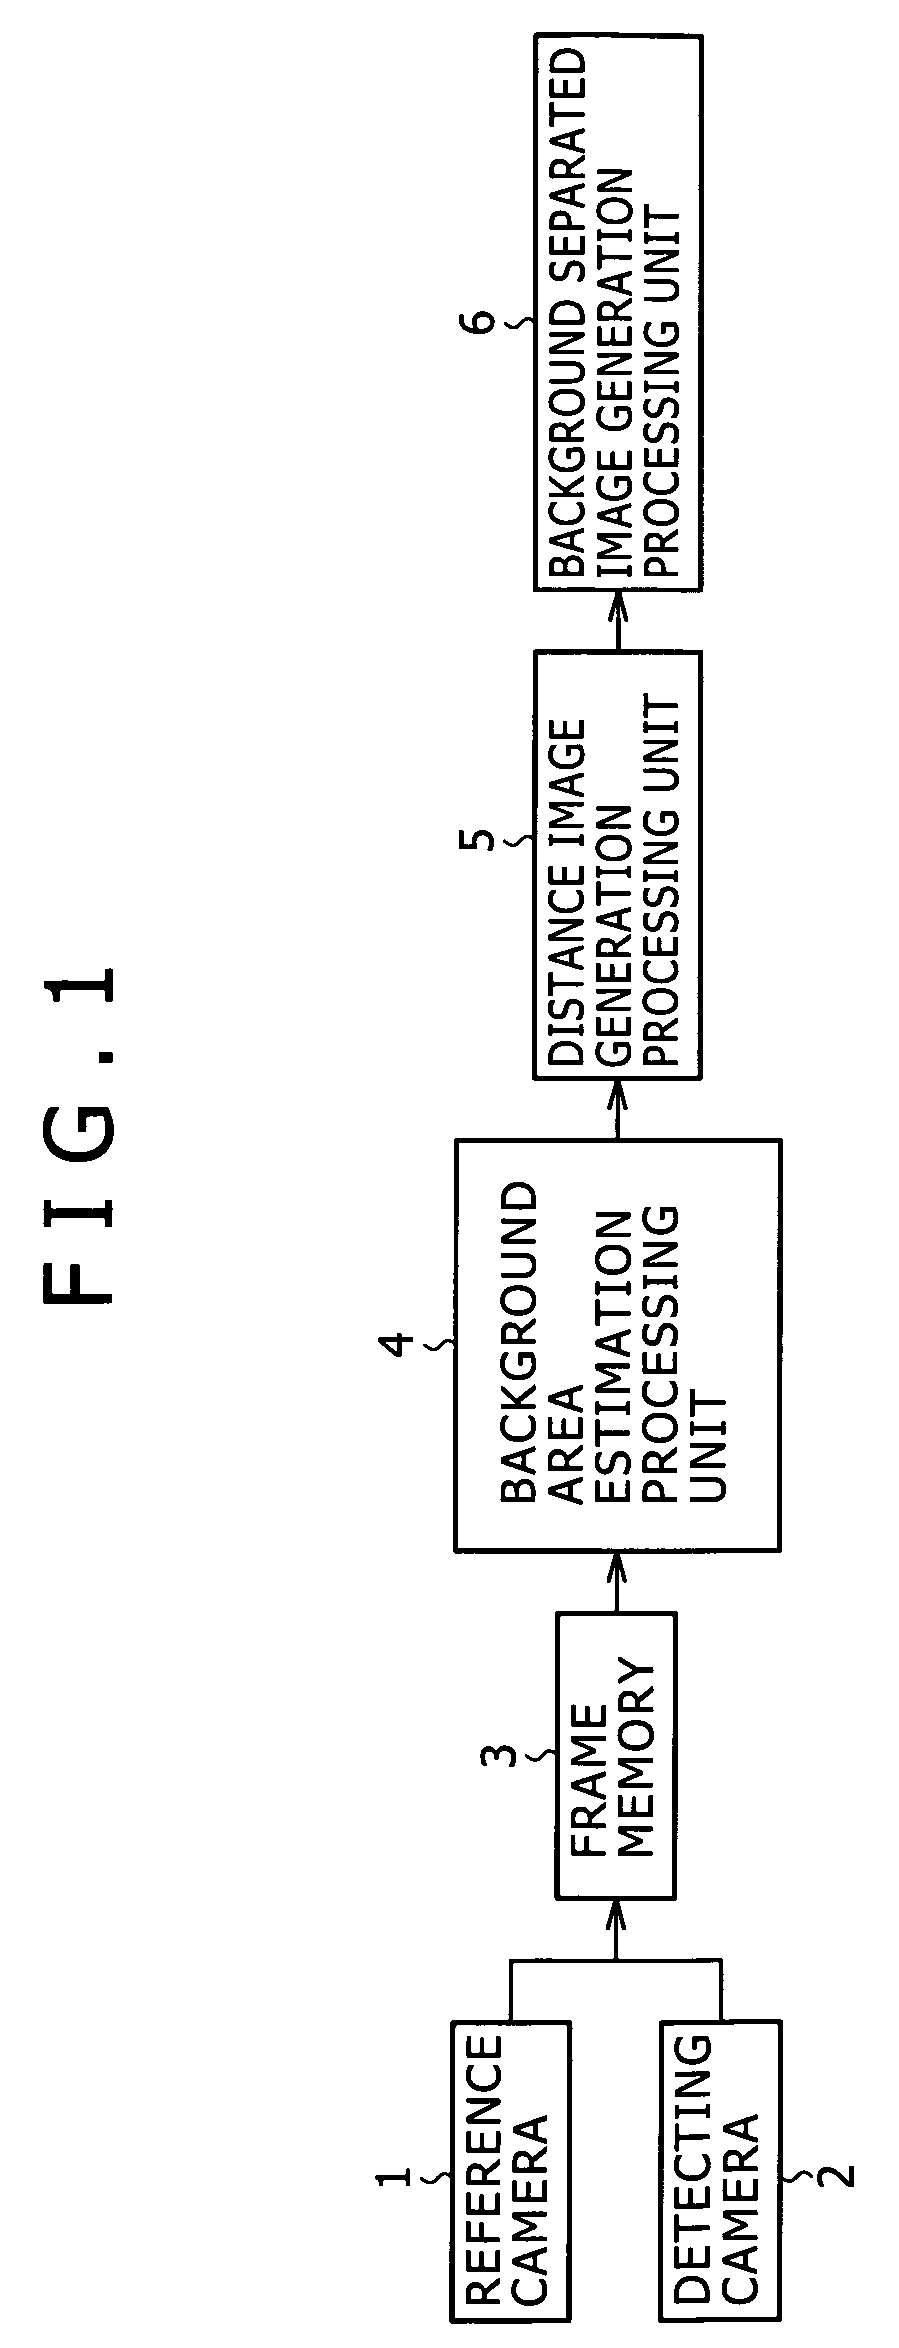 Image processing method and image processing device for separating the background area of an image